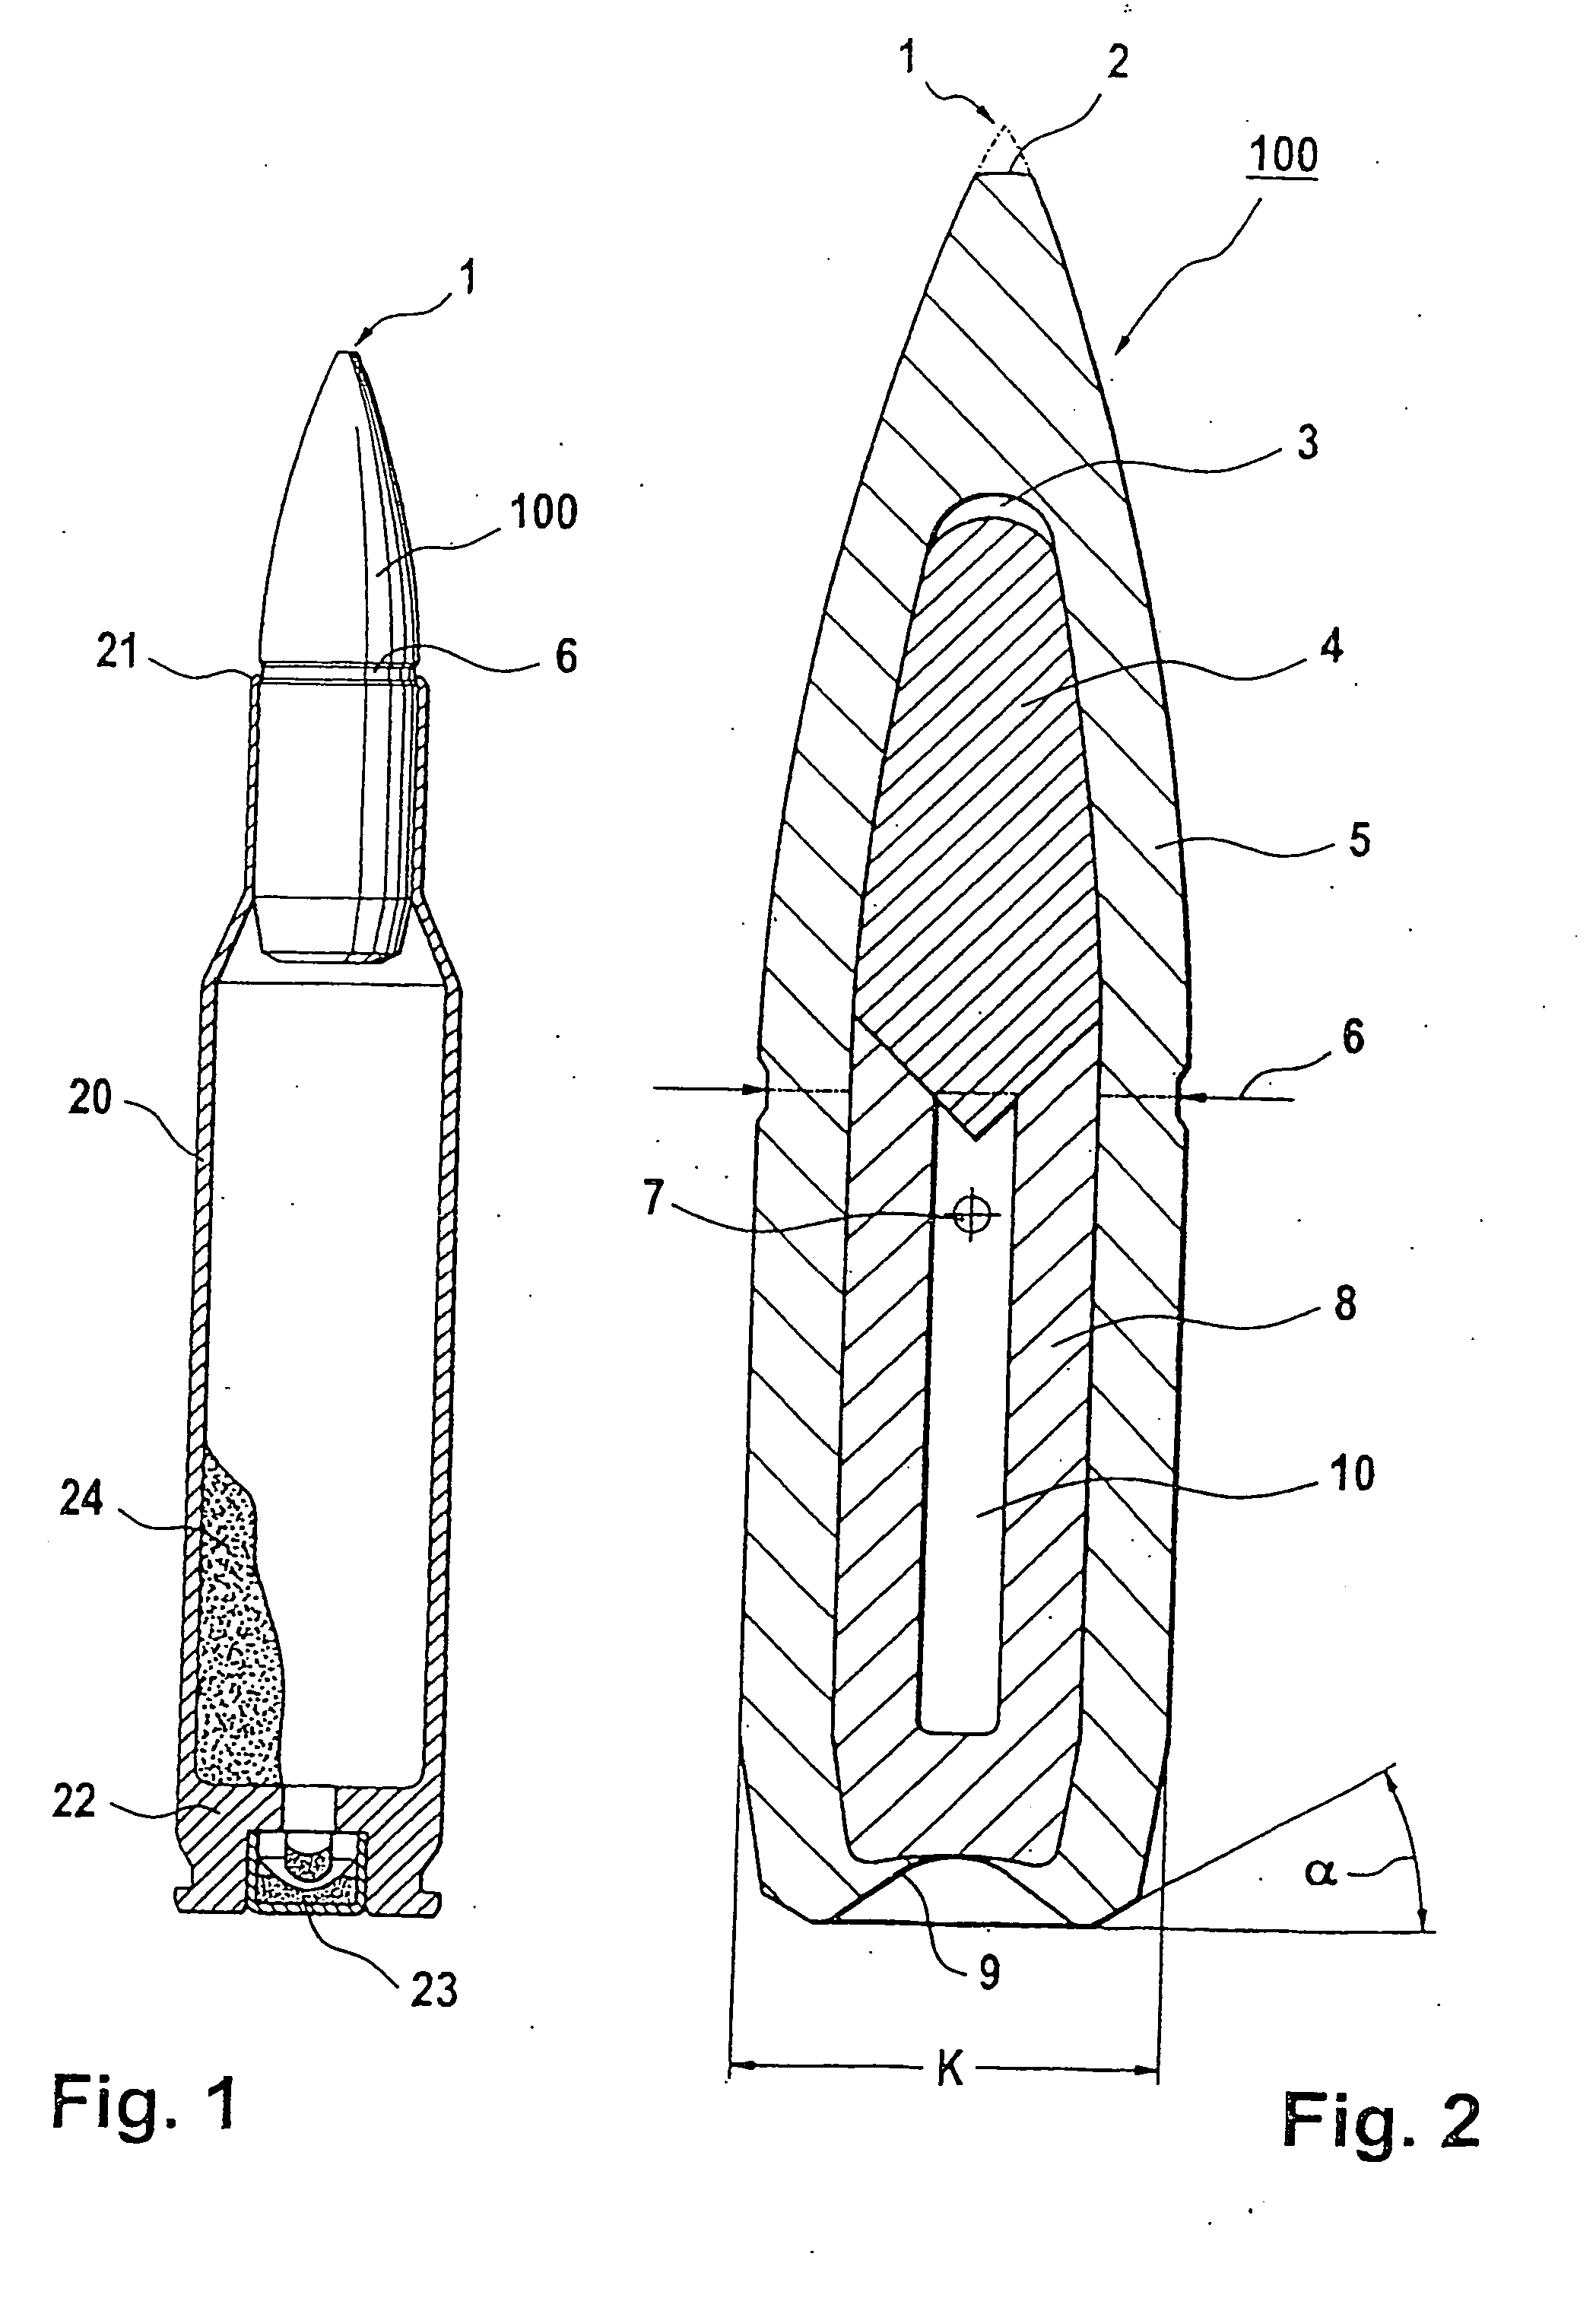 Lead-free projectile